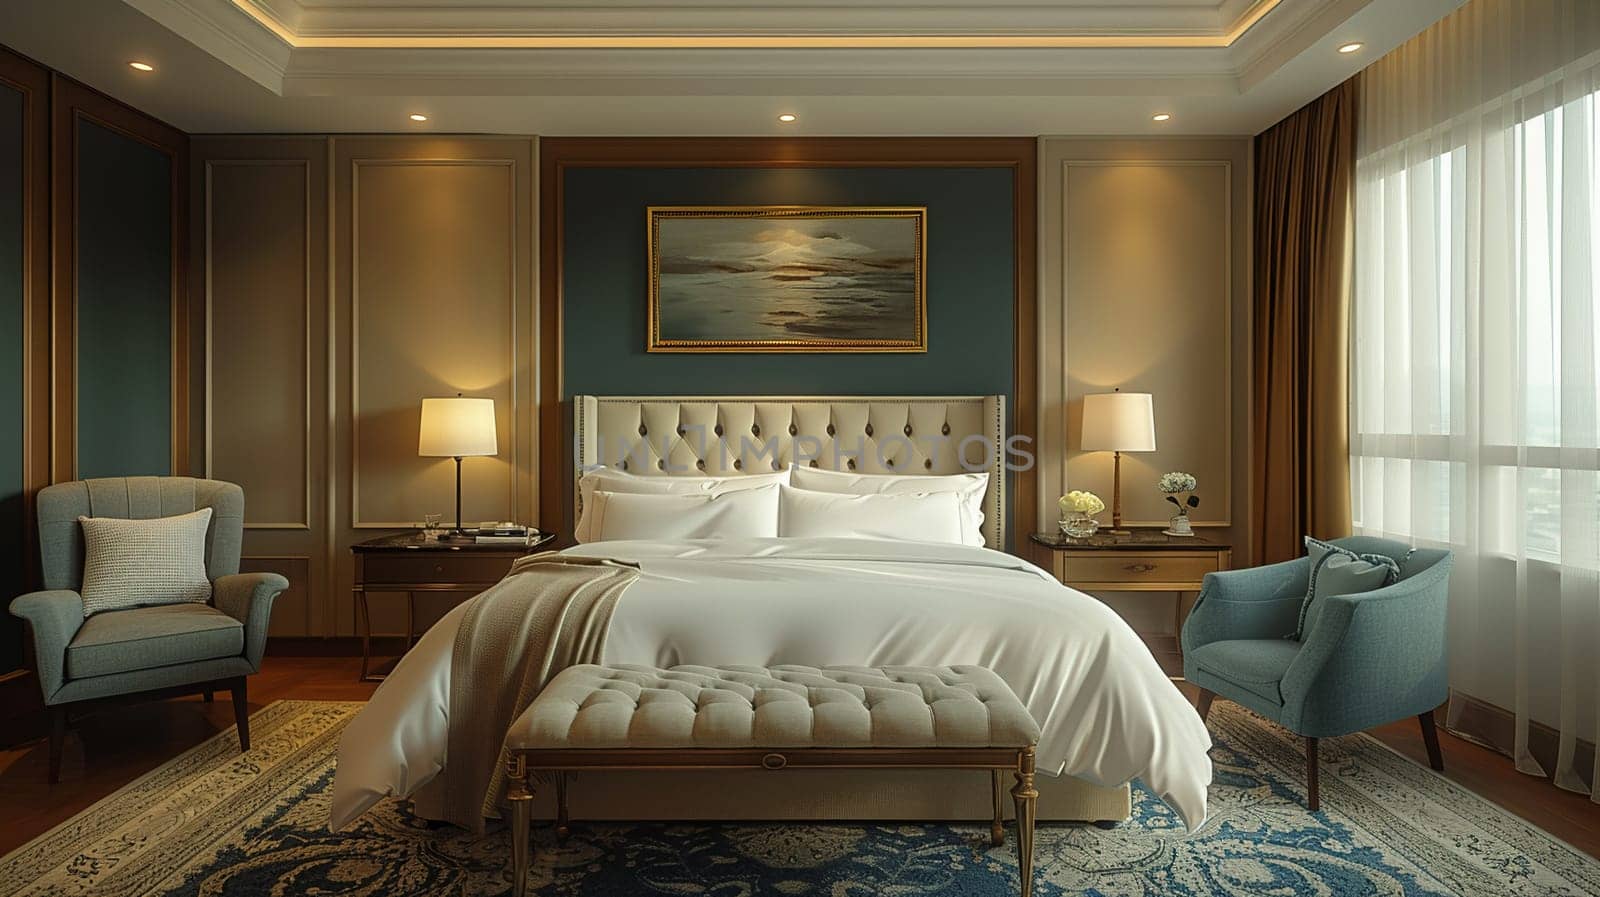 Understated luxury hotel suite with subtle textures and neutral tones8K